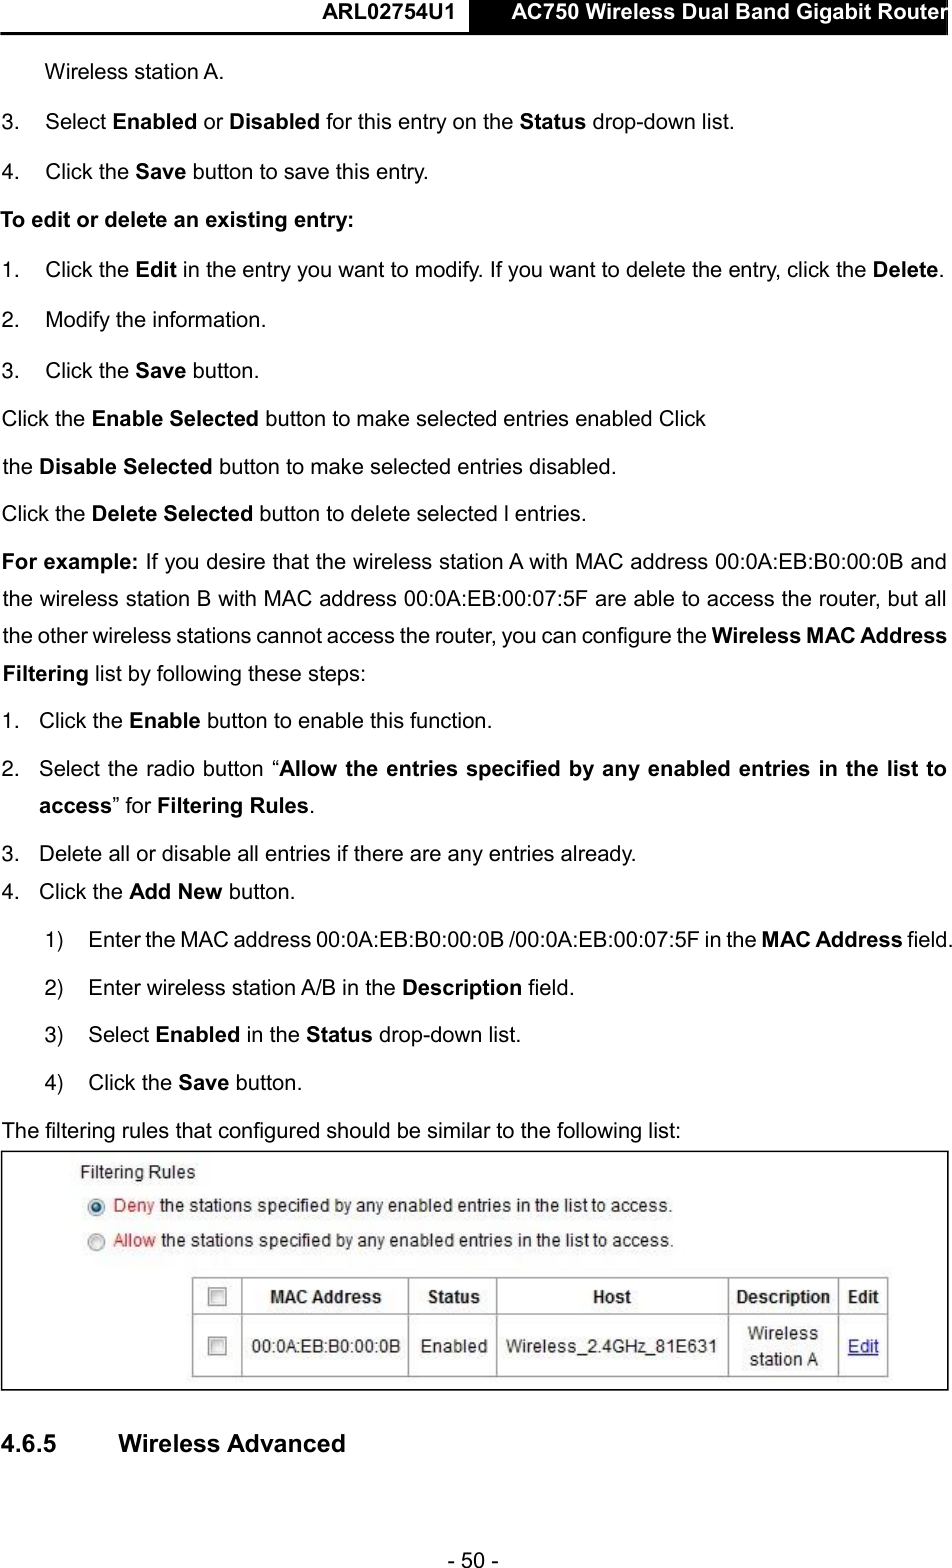  ARL02754U1  AC750 Wireless Dual Band Gigabit Router    - 50 -  Wireless station A.  3. Select Enabled or Disabled for this entry on the Status drop-down list.  4. Click the Save button to save this entry.  To edit or delete an existing entry:  1. Click the Edit in the entry you want to modify. If you want to delete the entry, click the Delete.  2. Modify the information.   3. Click the Save button.  Click the Enable Selected button to make selected entries enabled Click the Disable Selected button to make selected entries disabled.  Click the Delete Selected button to delete selected l entries.  For example: If you desire that the wireless station A with MAC address 00:0A:EB:B0:00:0B and the wireless station B with MAC address 00:0A:EB:00:07:5F are able to access the router, but all the other wireless stations cannot access the router, you can configure the Wireless MAC Address Filtering list by following these steps:  1. Click the Enable button to enable this function.  2. Select the radio button “Allow the entries specified by any enabled entries in the list to access” for Filtering Rules.  3. Delete all or disable all entries if there are any entries already.  4. Click the Add New button.   1) Enter the MAC address 00:0A:EB:B0:00:0B /00:0A:EB:00:07:5F in the MAC Address field.  2) Enter wireless station A/B in the Description field.  3) Select Enabled in the Status drop-down list.  4) Click the Save button.  The filtering rules that configured should be similar to the following list:     4.6.5   Wireless Advanced  